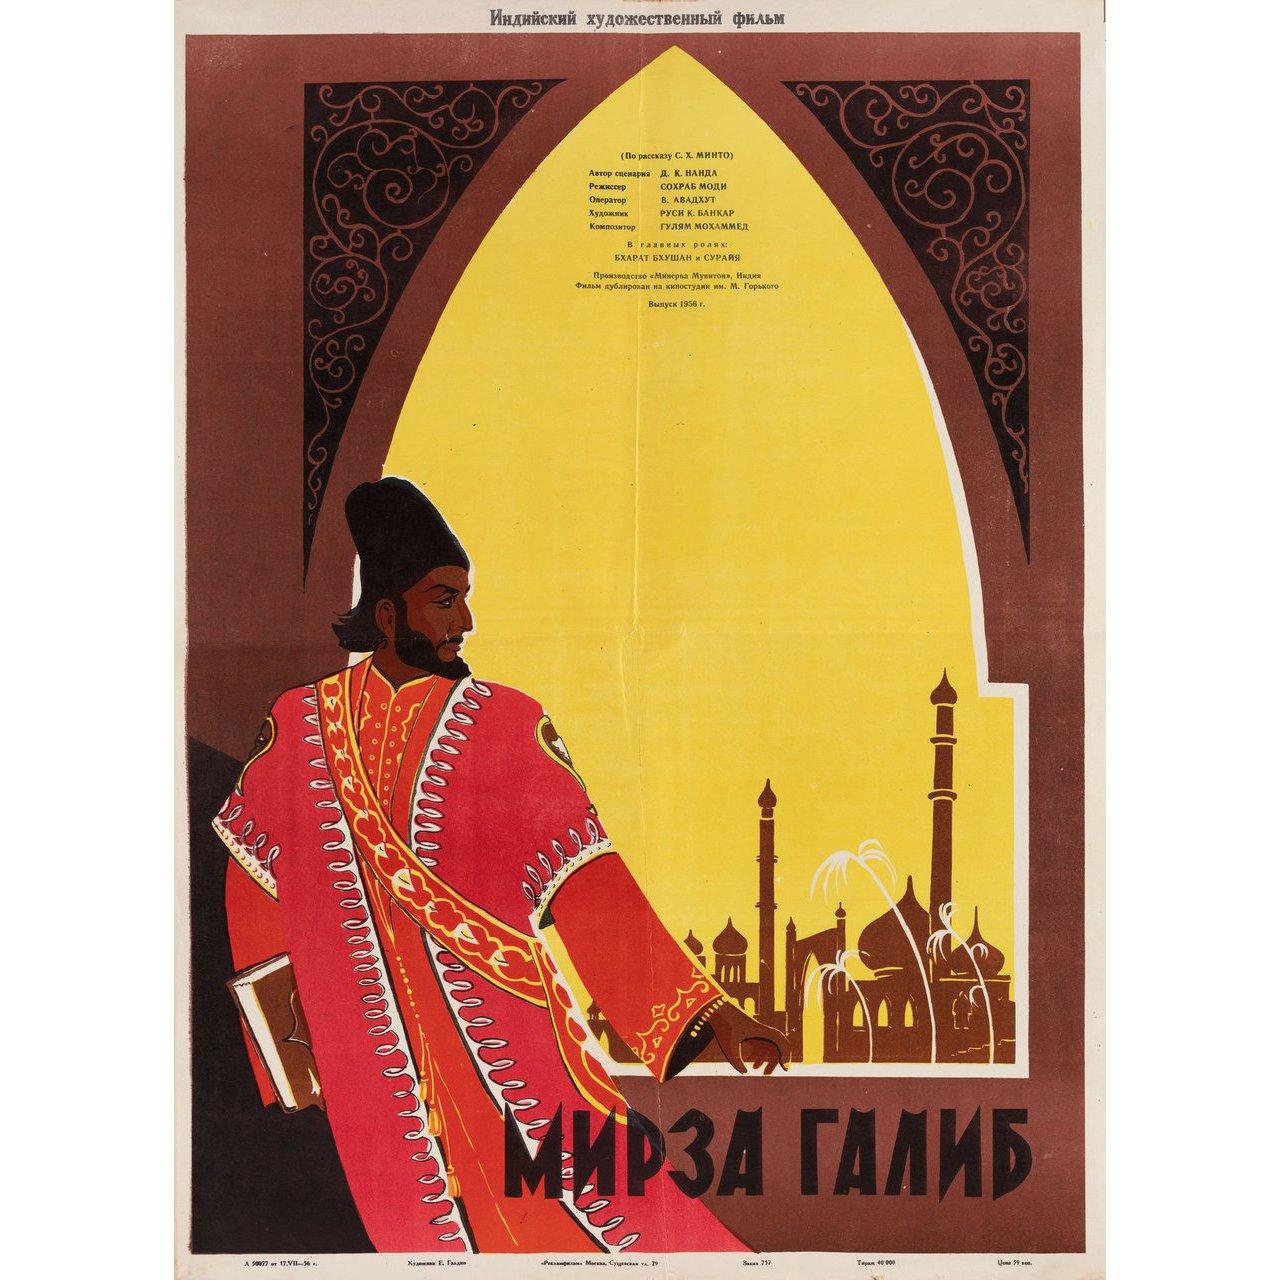 Original 1956 Russian B2 poster for the film Mirza Ghalib directed by Sohrab Modi with Bharat Bhushan / Suraiya / Nigar Sultana. Very Good-Fine condition, folded. Many original posters were issued folded or were subsequently folded. Please note: the